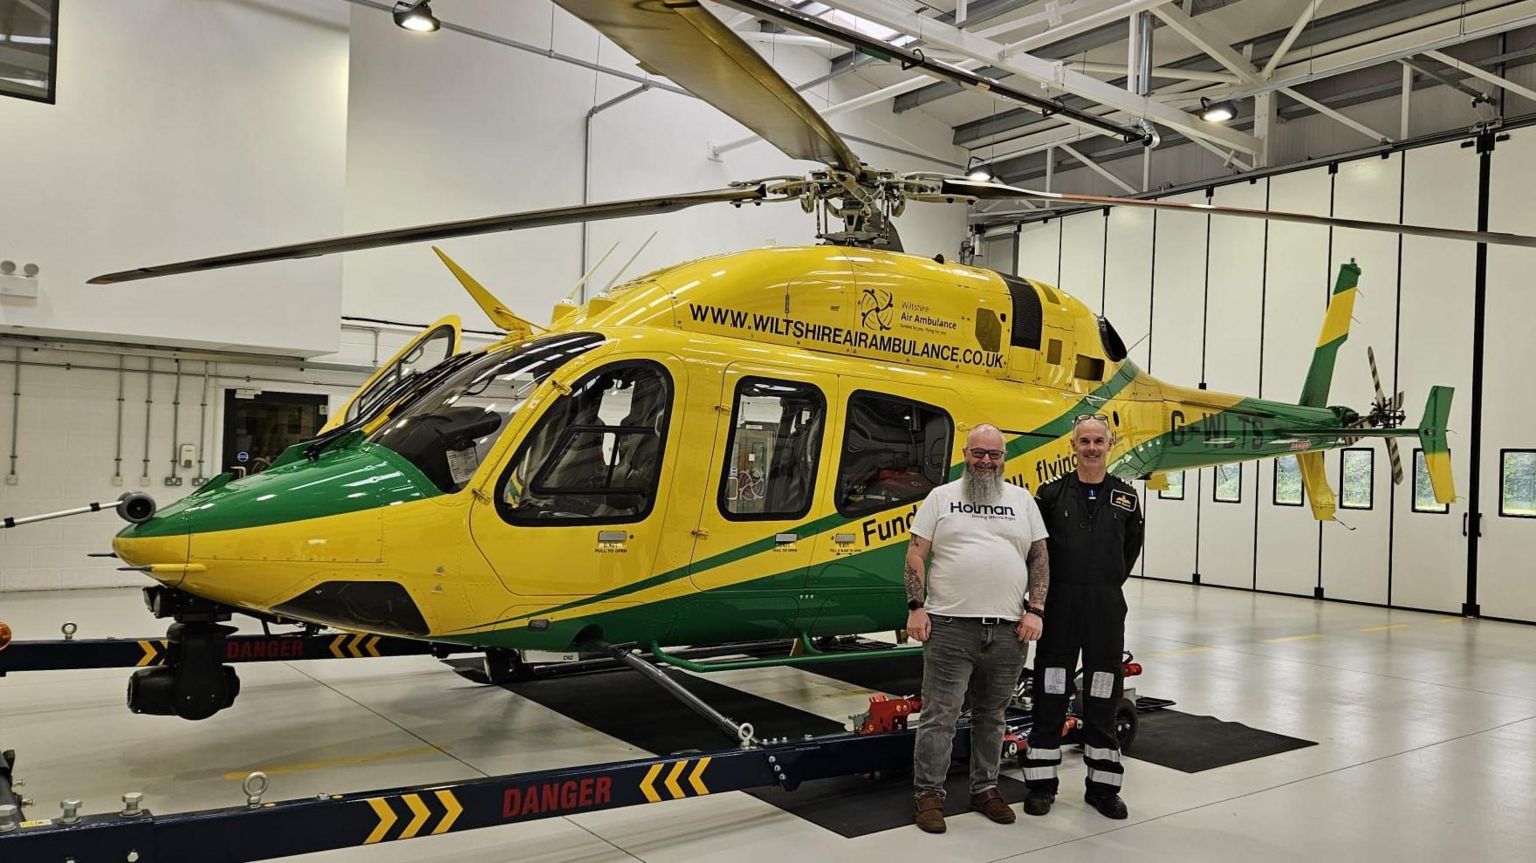 A picture shows Mr Hornsey inside the Wiltshire Air Ambulance base, next to a member of the charity's crew. They are standing next to a yellow and green helicopter with the charity branding on it, and are smiling at the camera. 